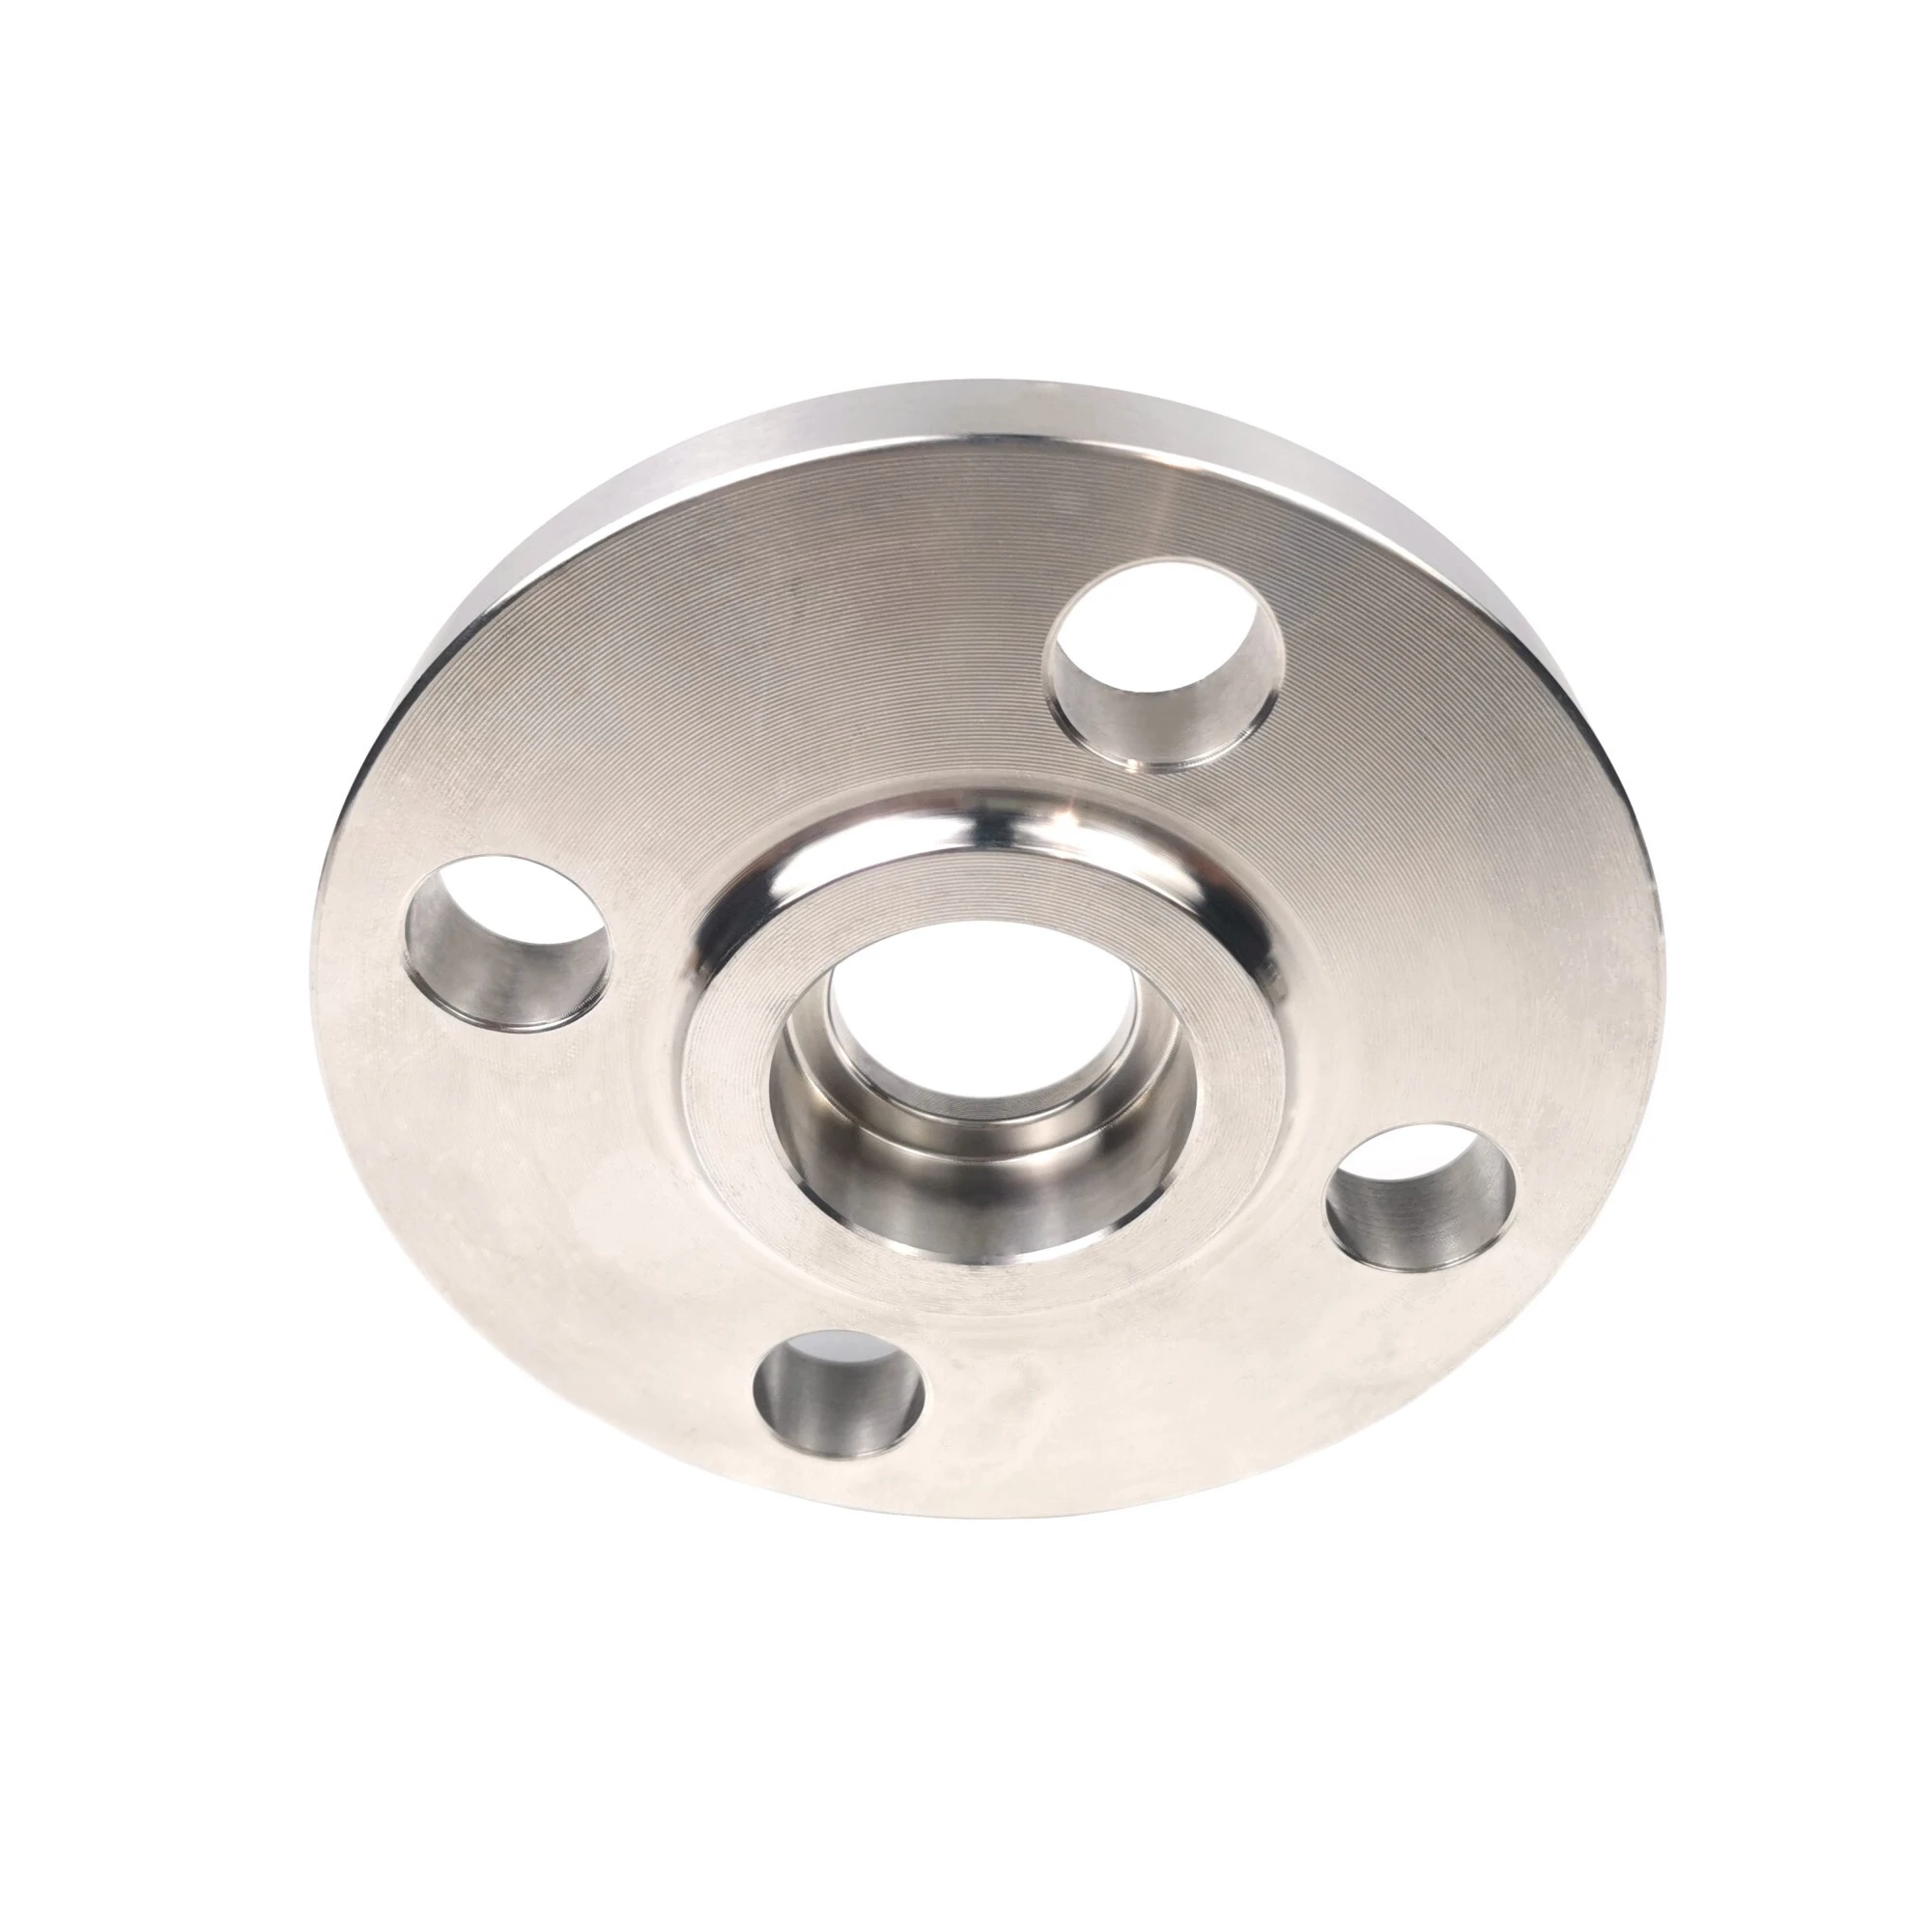 SS 316 SW Flange, 150LB, 2 Inch, Good Sealing Performance